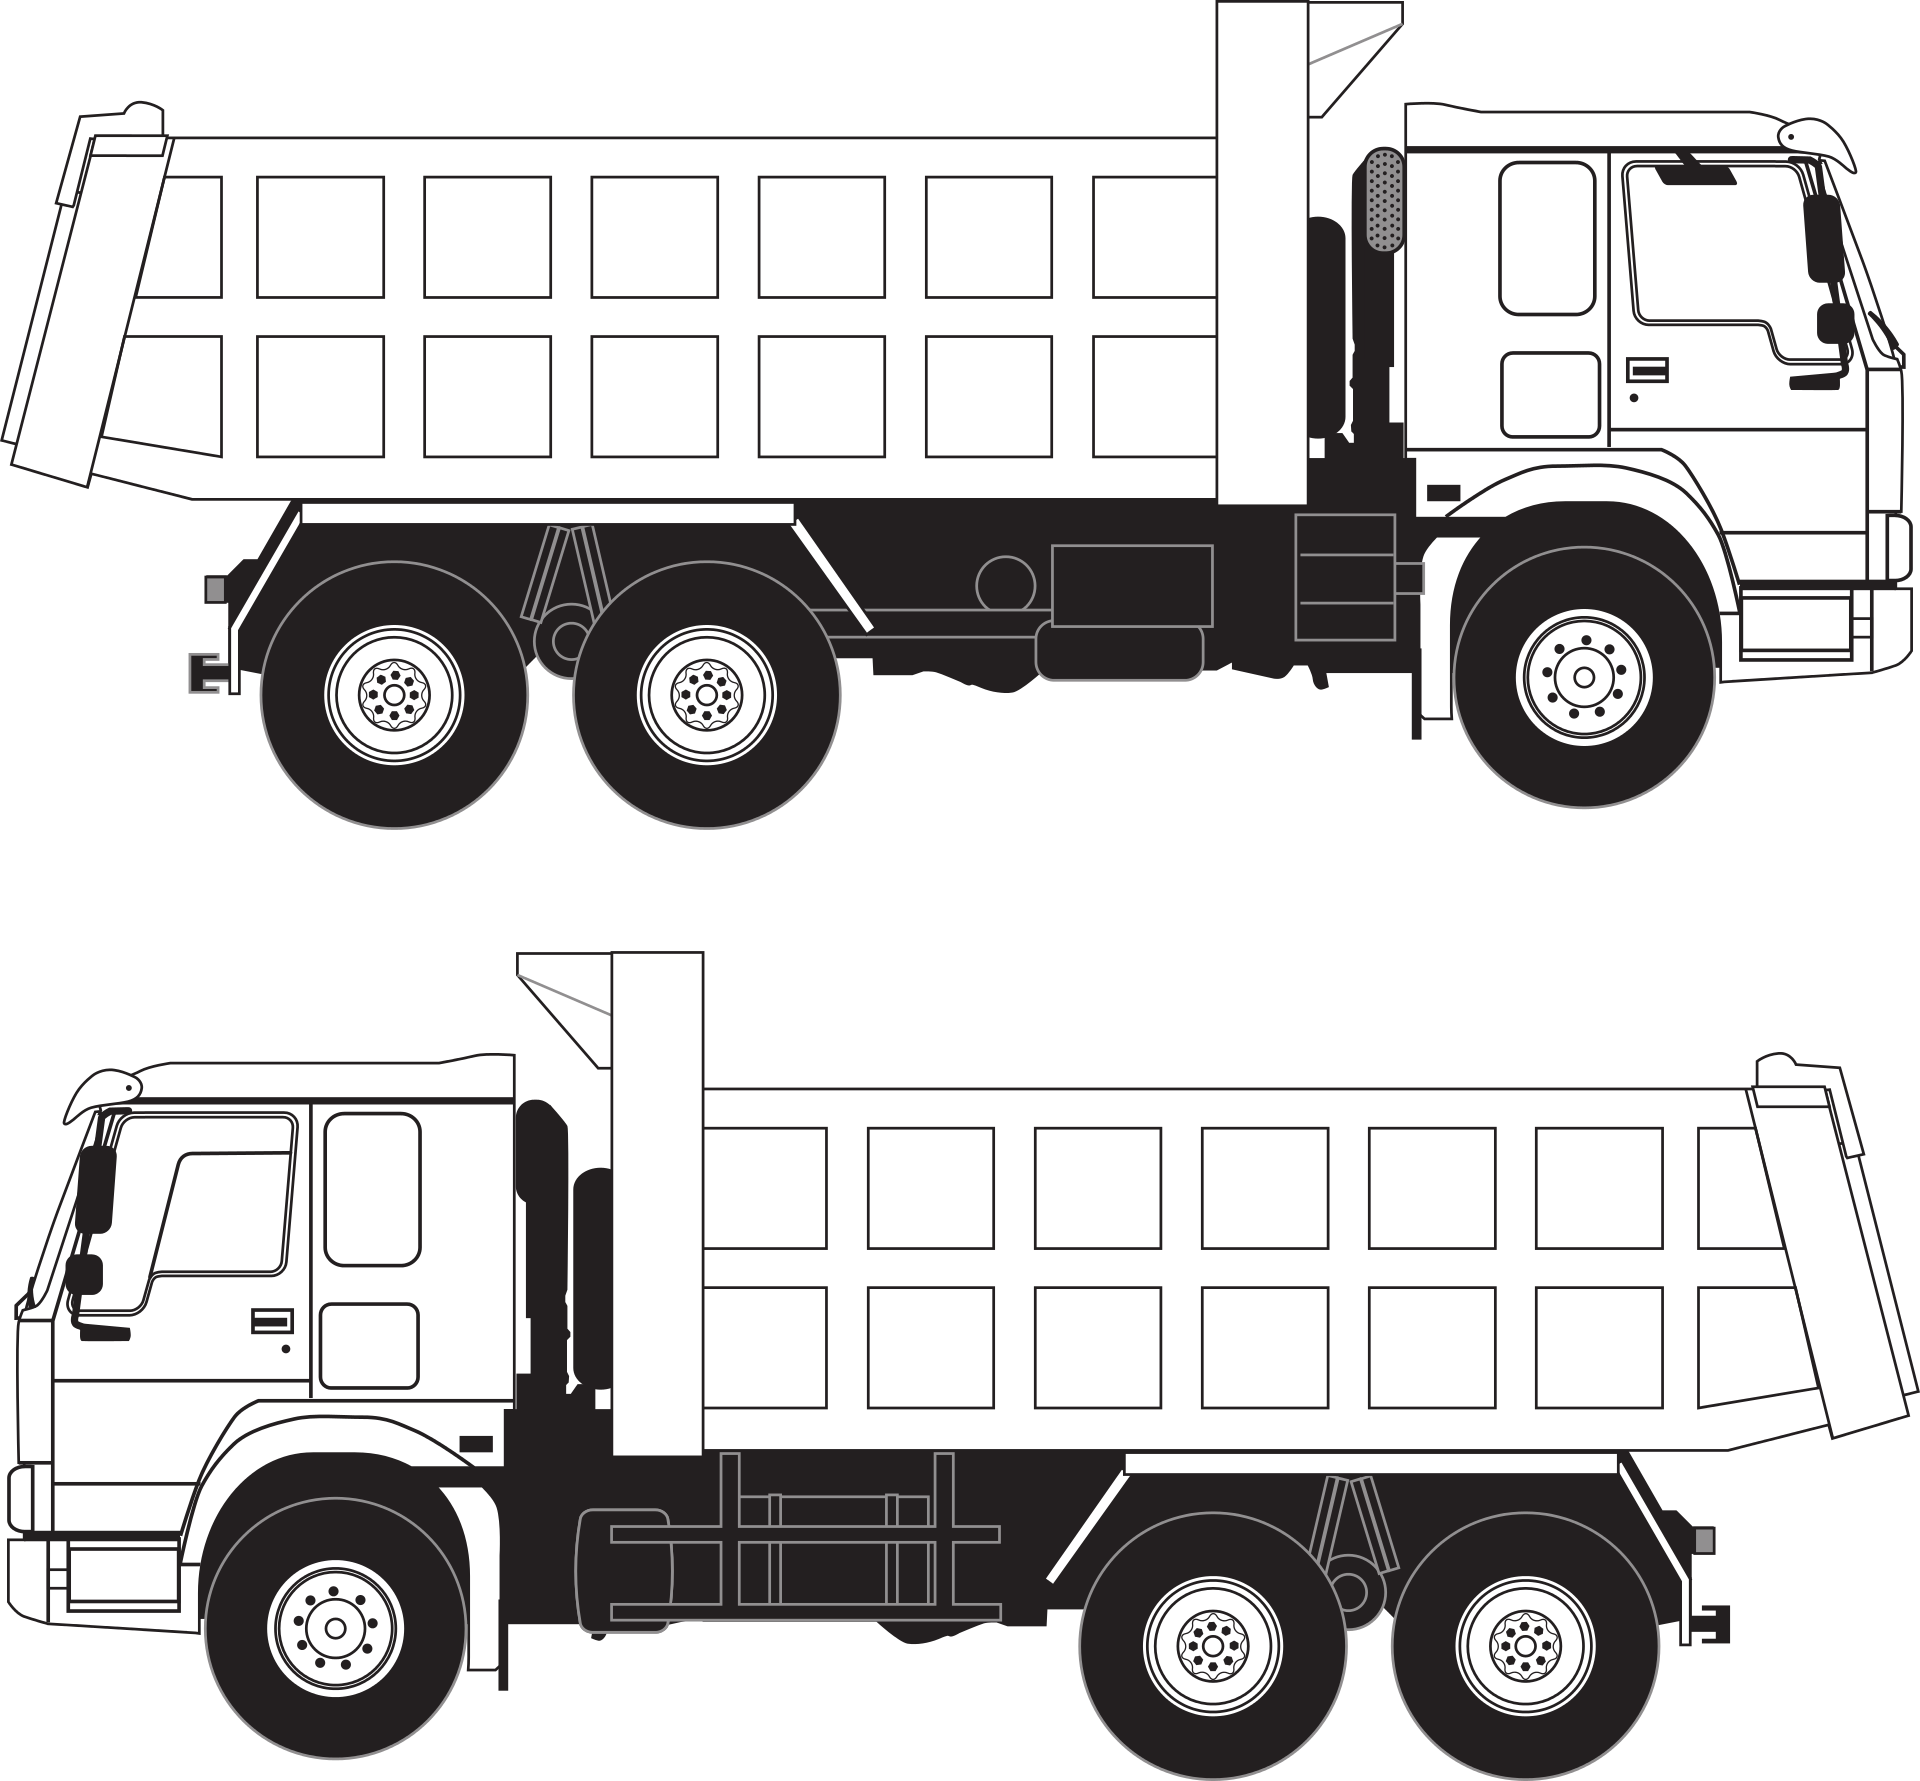 Two Trucks, Graphic, Object, Transport, Truck, HQ Photo